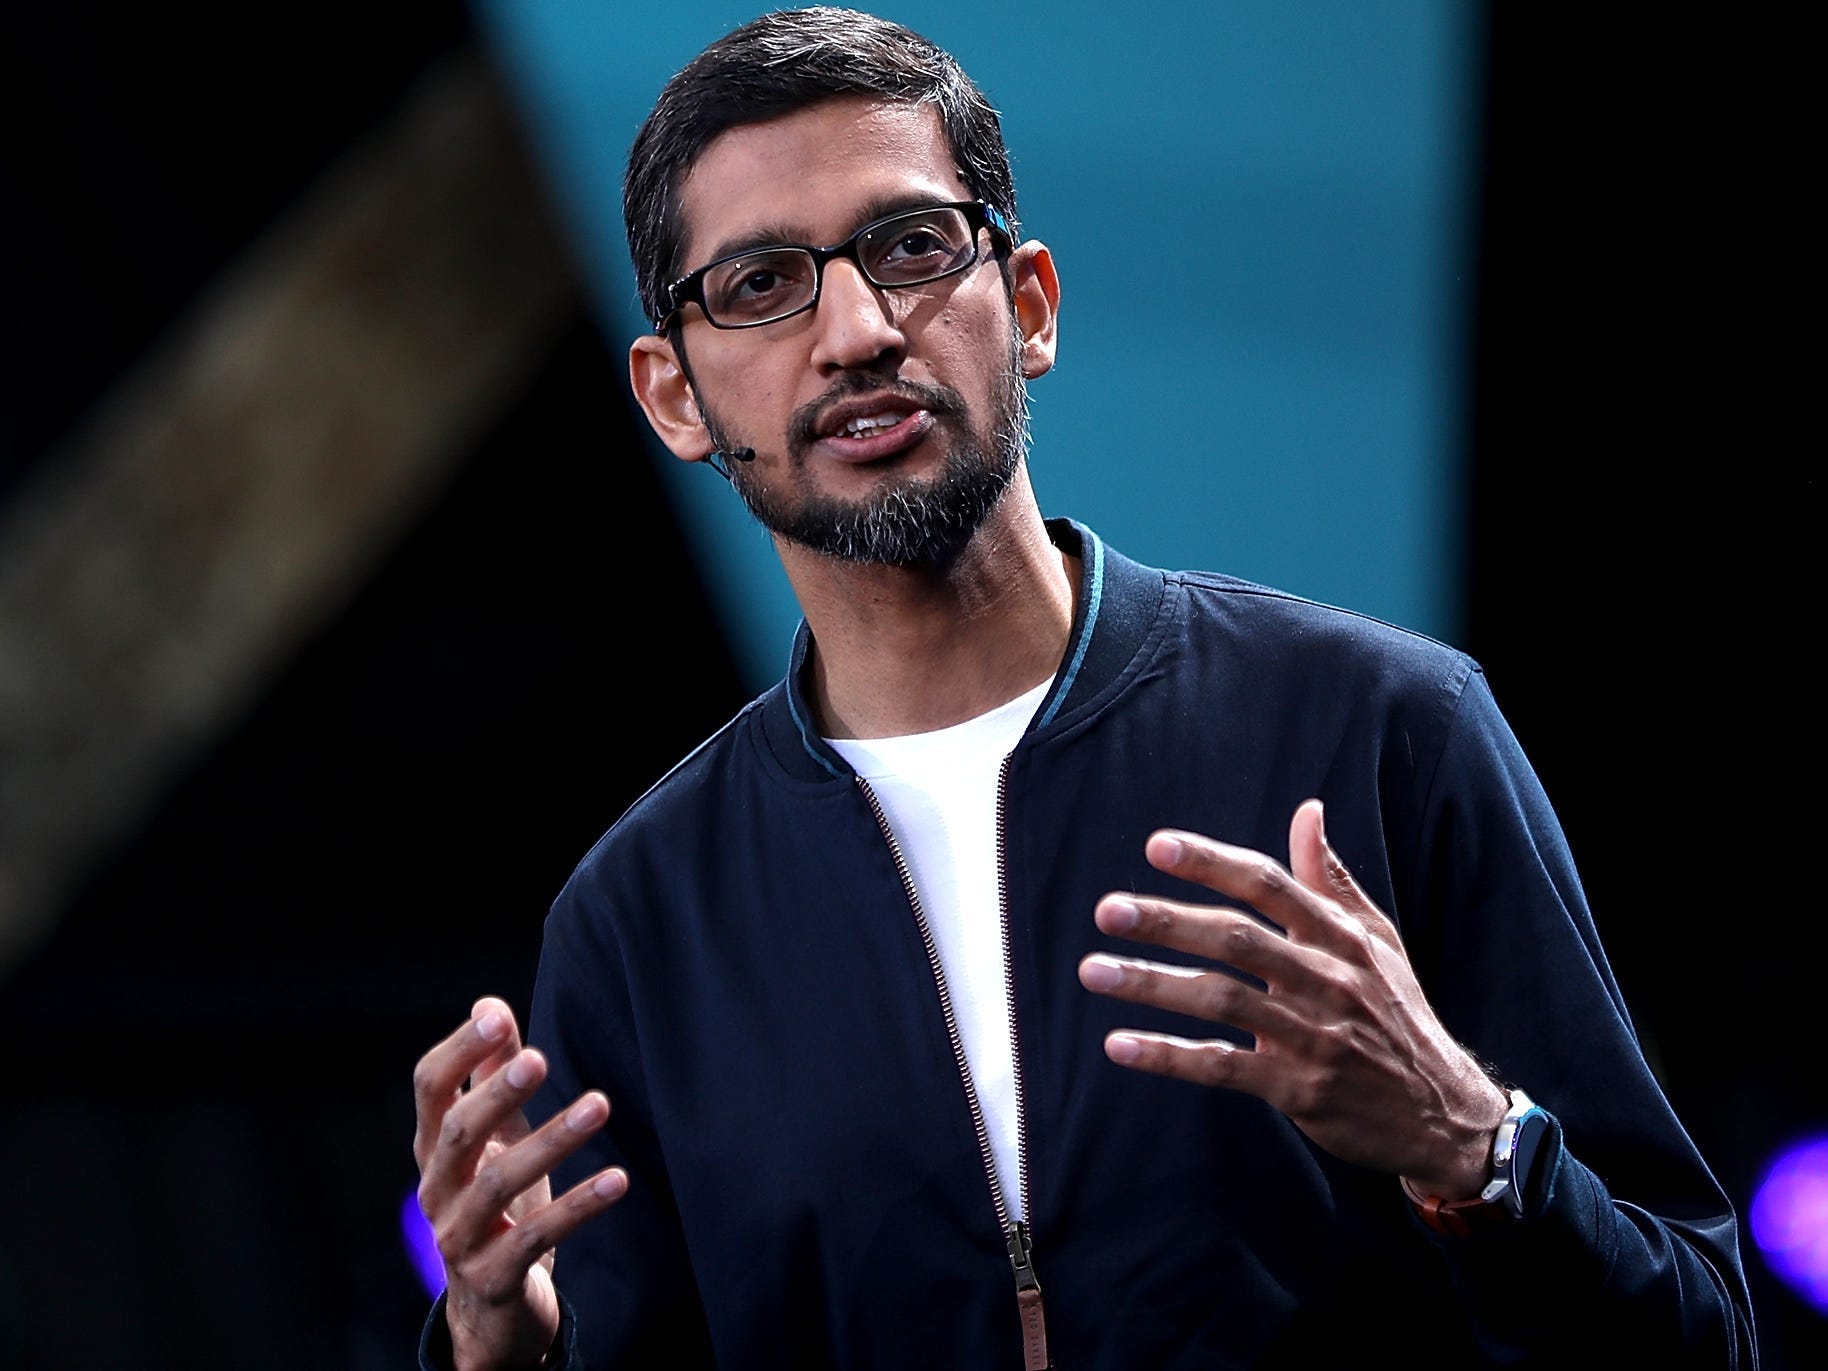 Google CEO Sundar Pichai speaks during Google I/O 2016 at Shoreline Amphitheatre on May 19, 2016 in Mountain View, California. The annual Google I/O conference is runs through May 20.